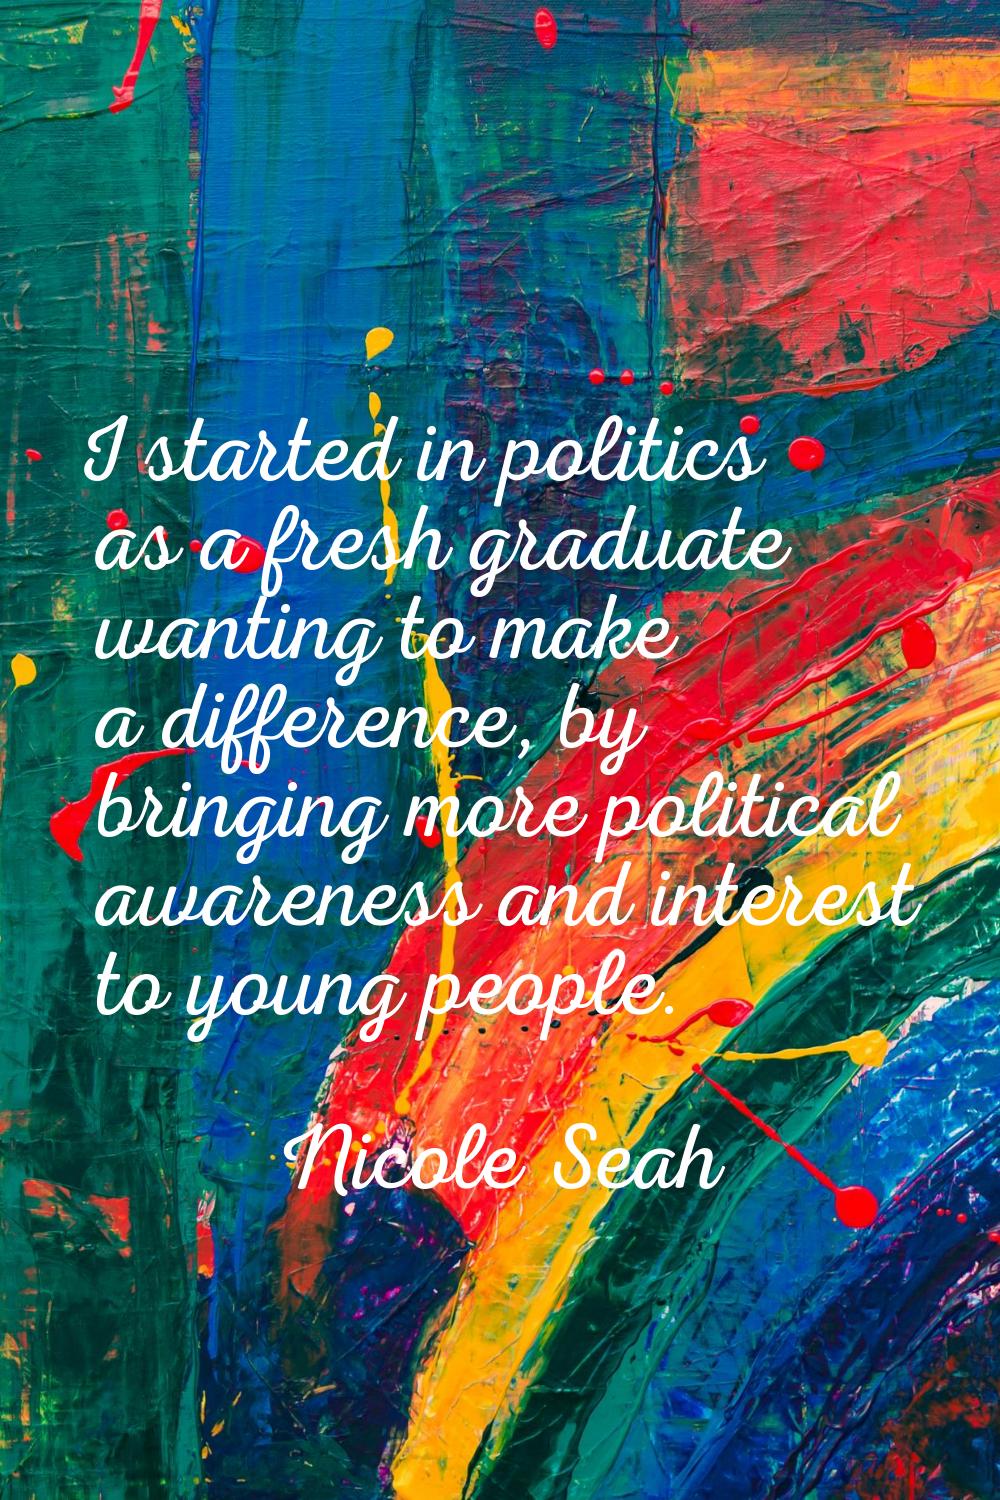 I started in politics as a fresh graduate wanting to make a difference, by bringing more political 